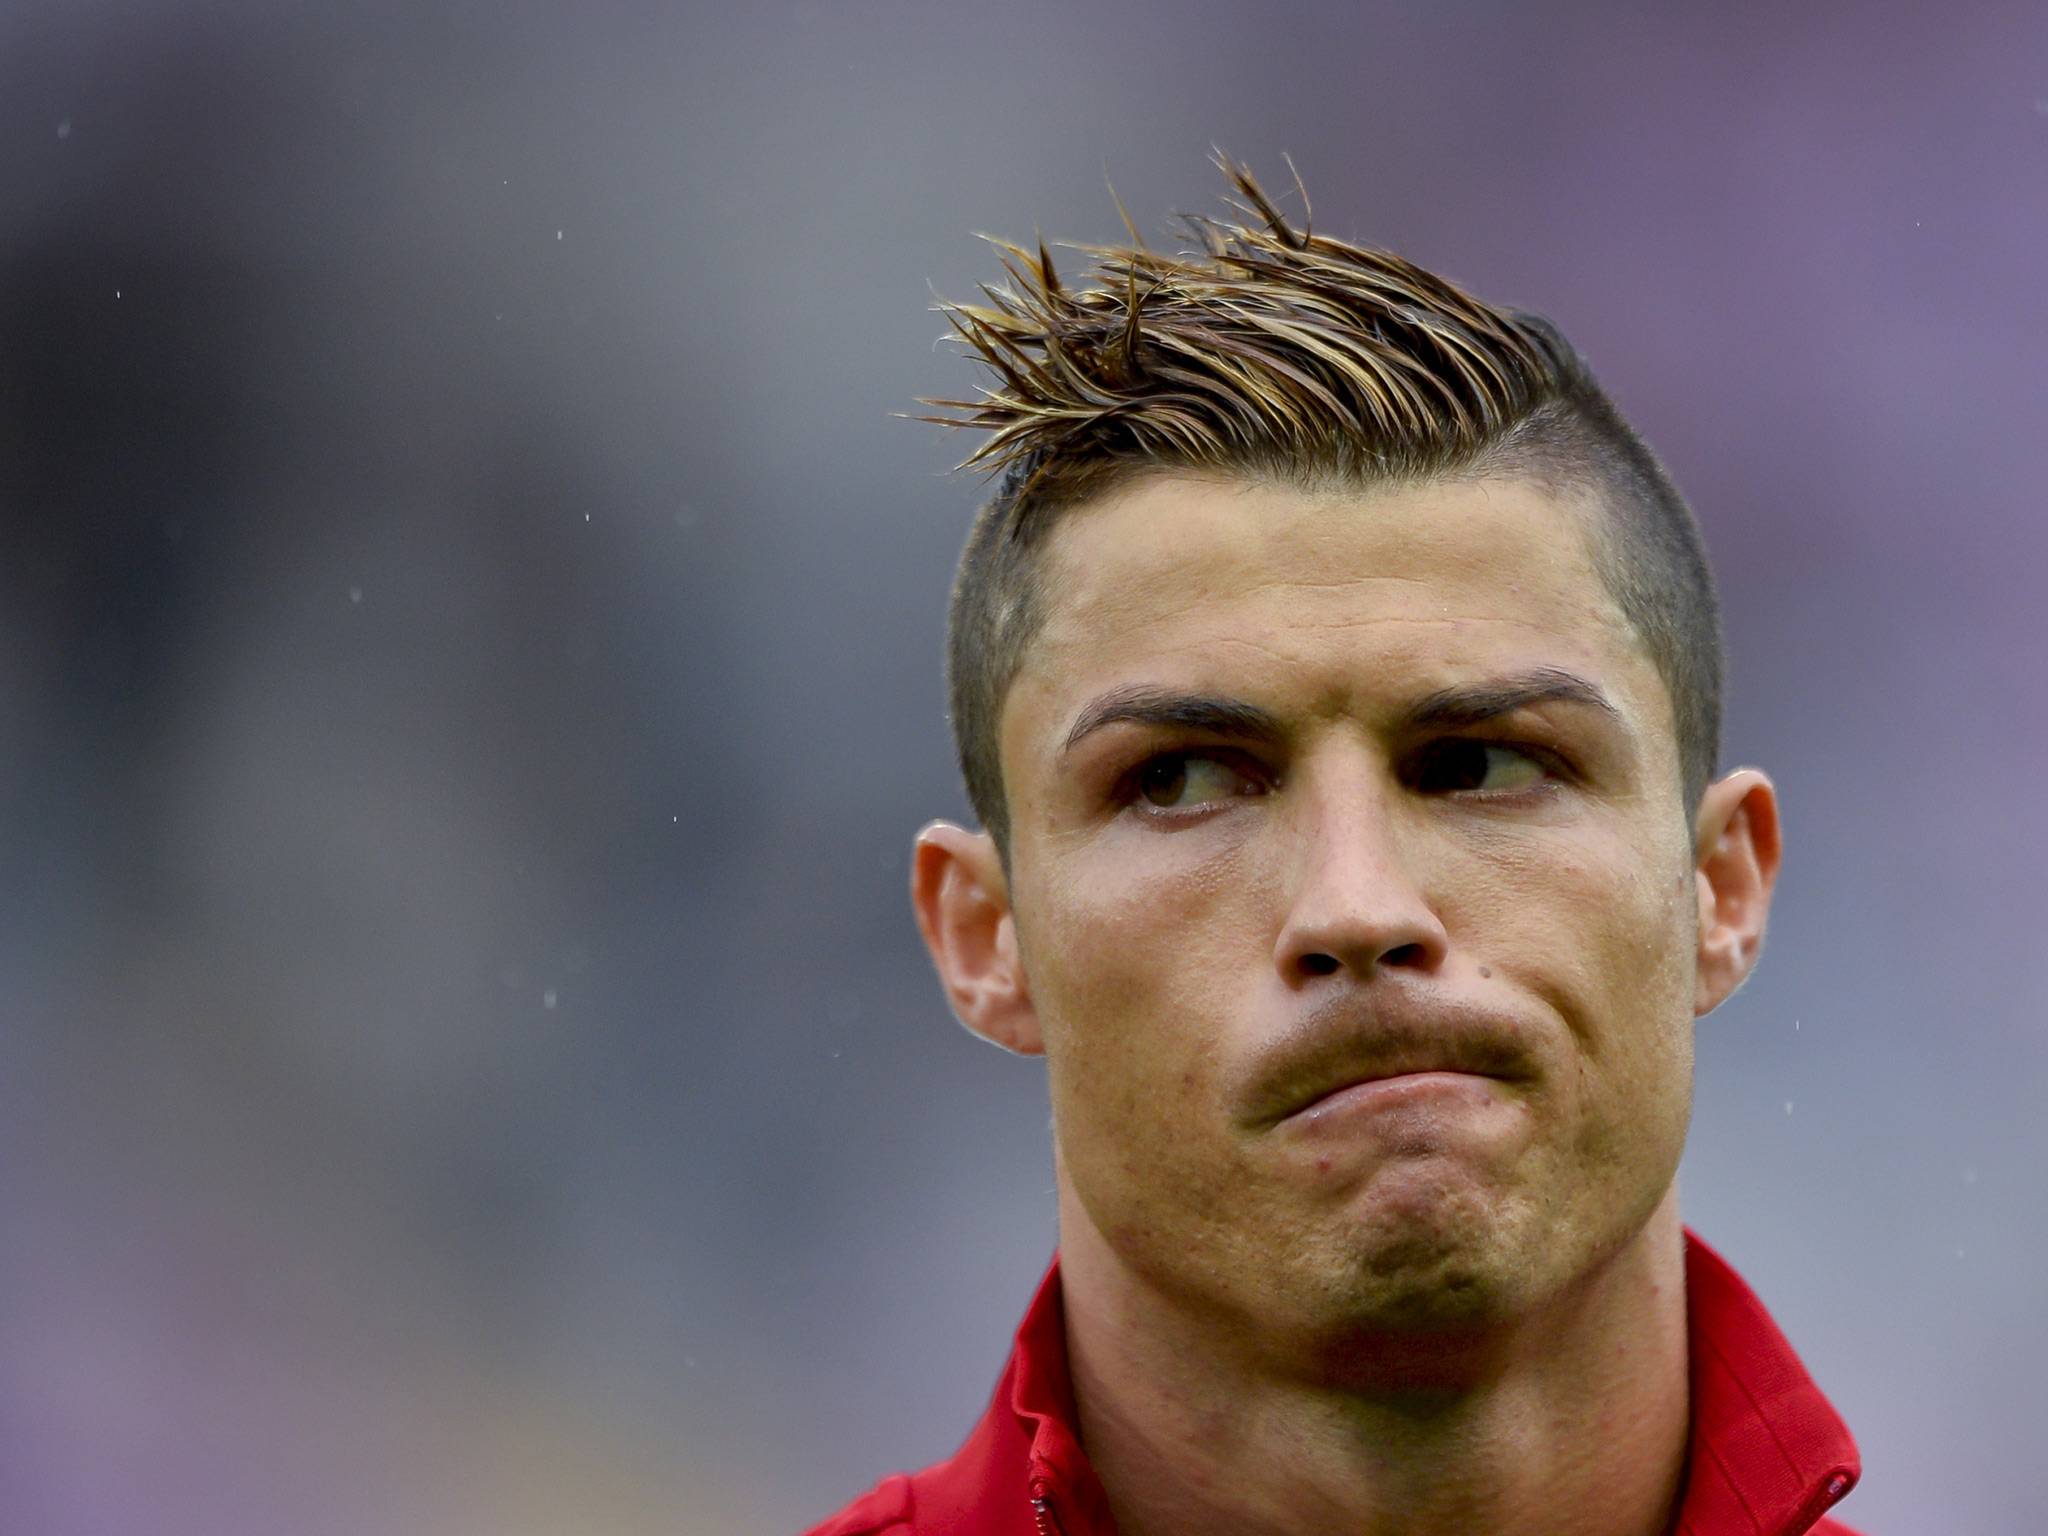 Cristiano Ronaldo Hairstyle Wallpapers Pictures | HD ...